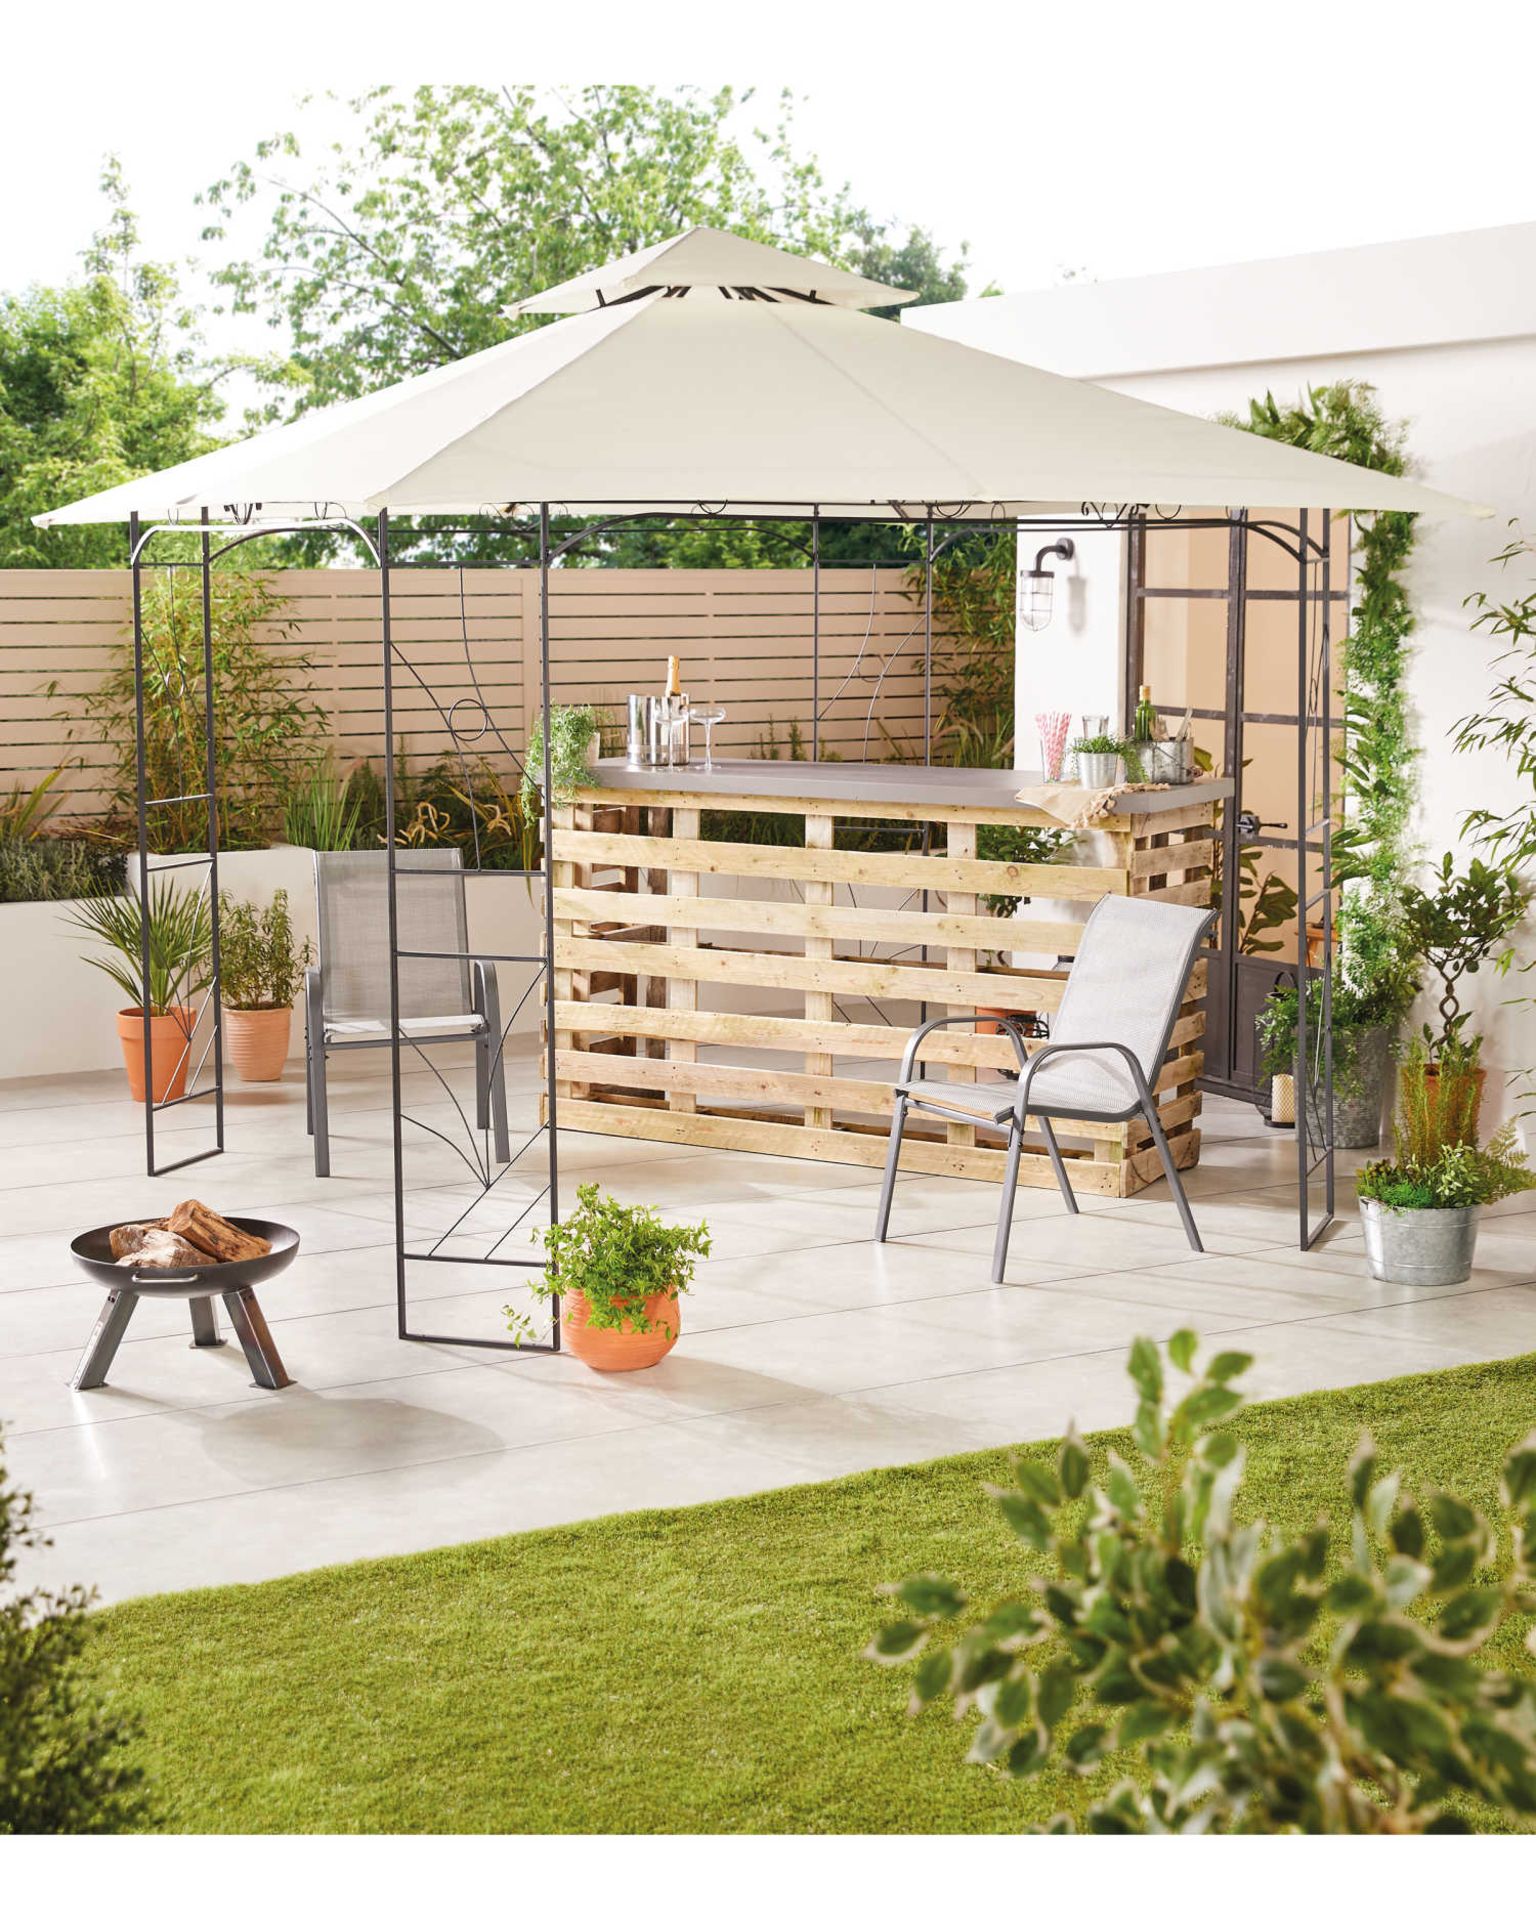 2.9m Decorative Gazebo. Never get caught out during the rain or sunshine with this Decorative